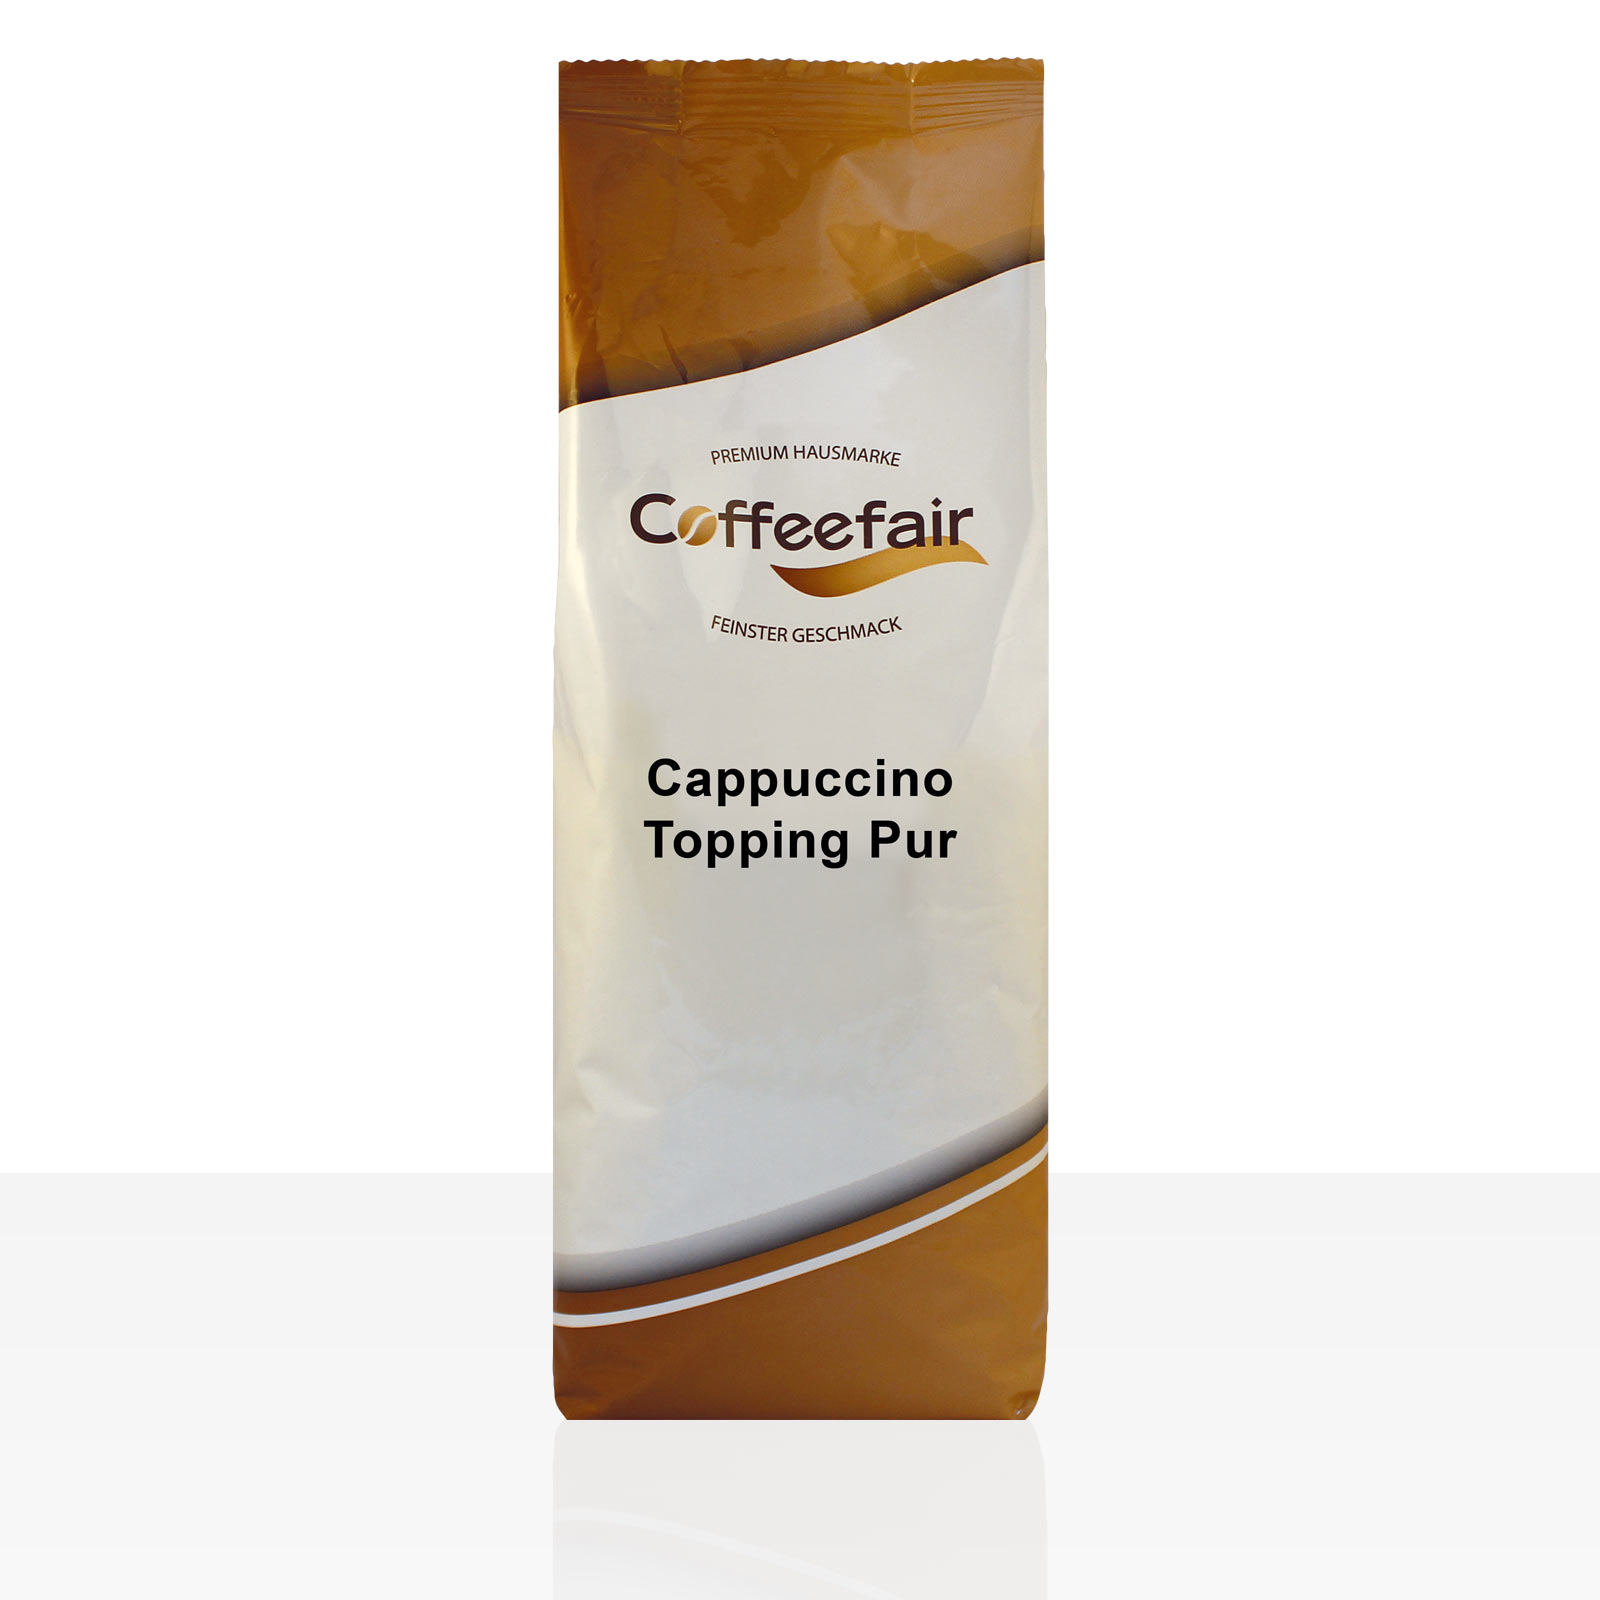 Coffeefair Cappuccino Topping Pur - 10 x 750g Milchpulver Instant-Milch